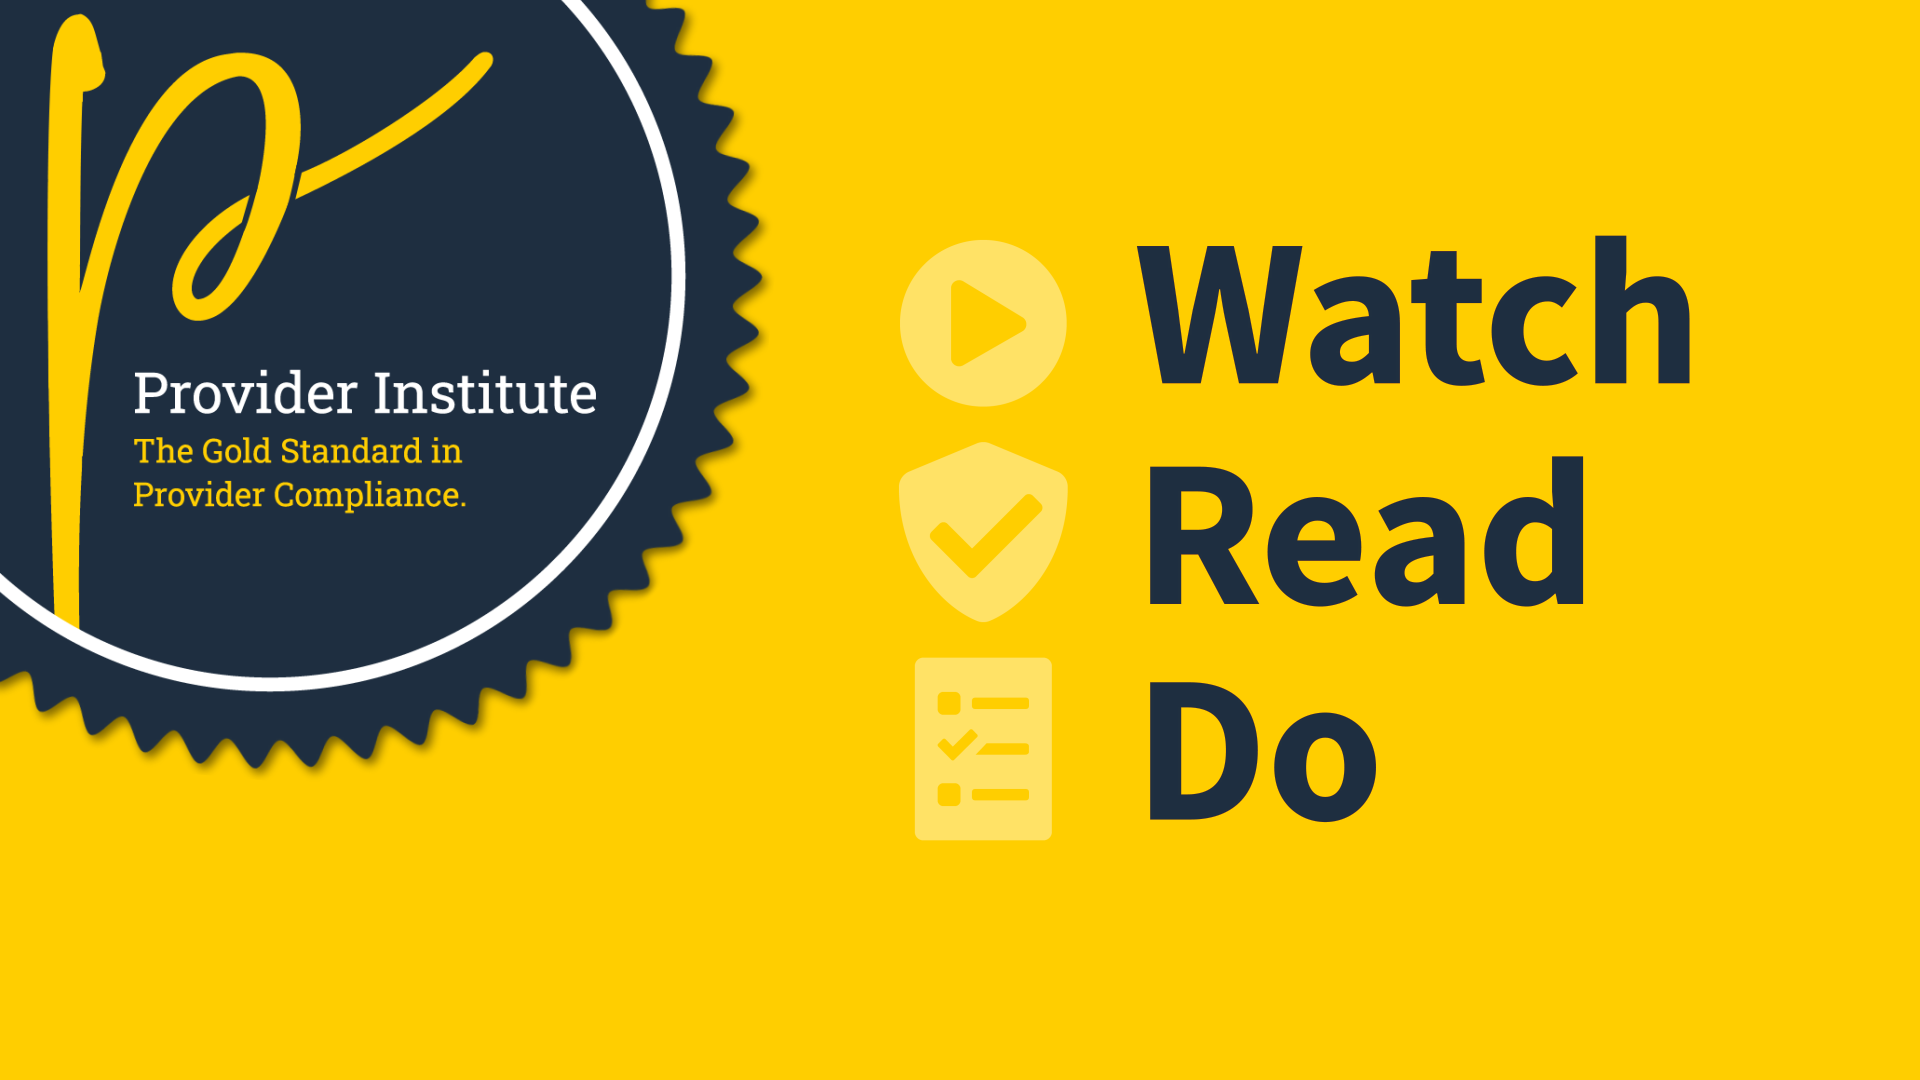 Watch.Read.Do is an integral part of a maintaining your Quality Management obligations.